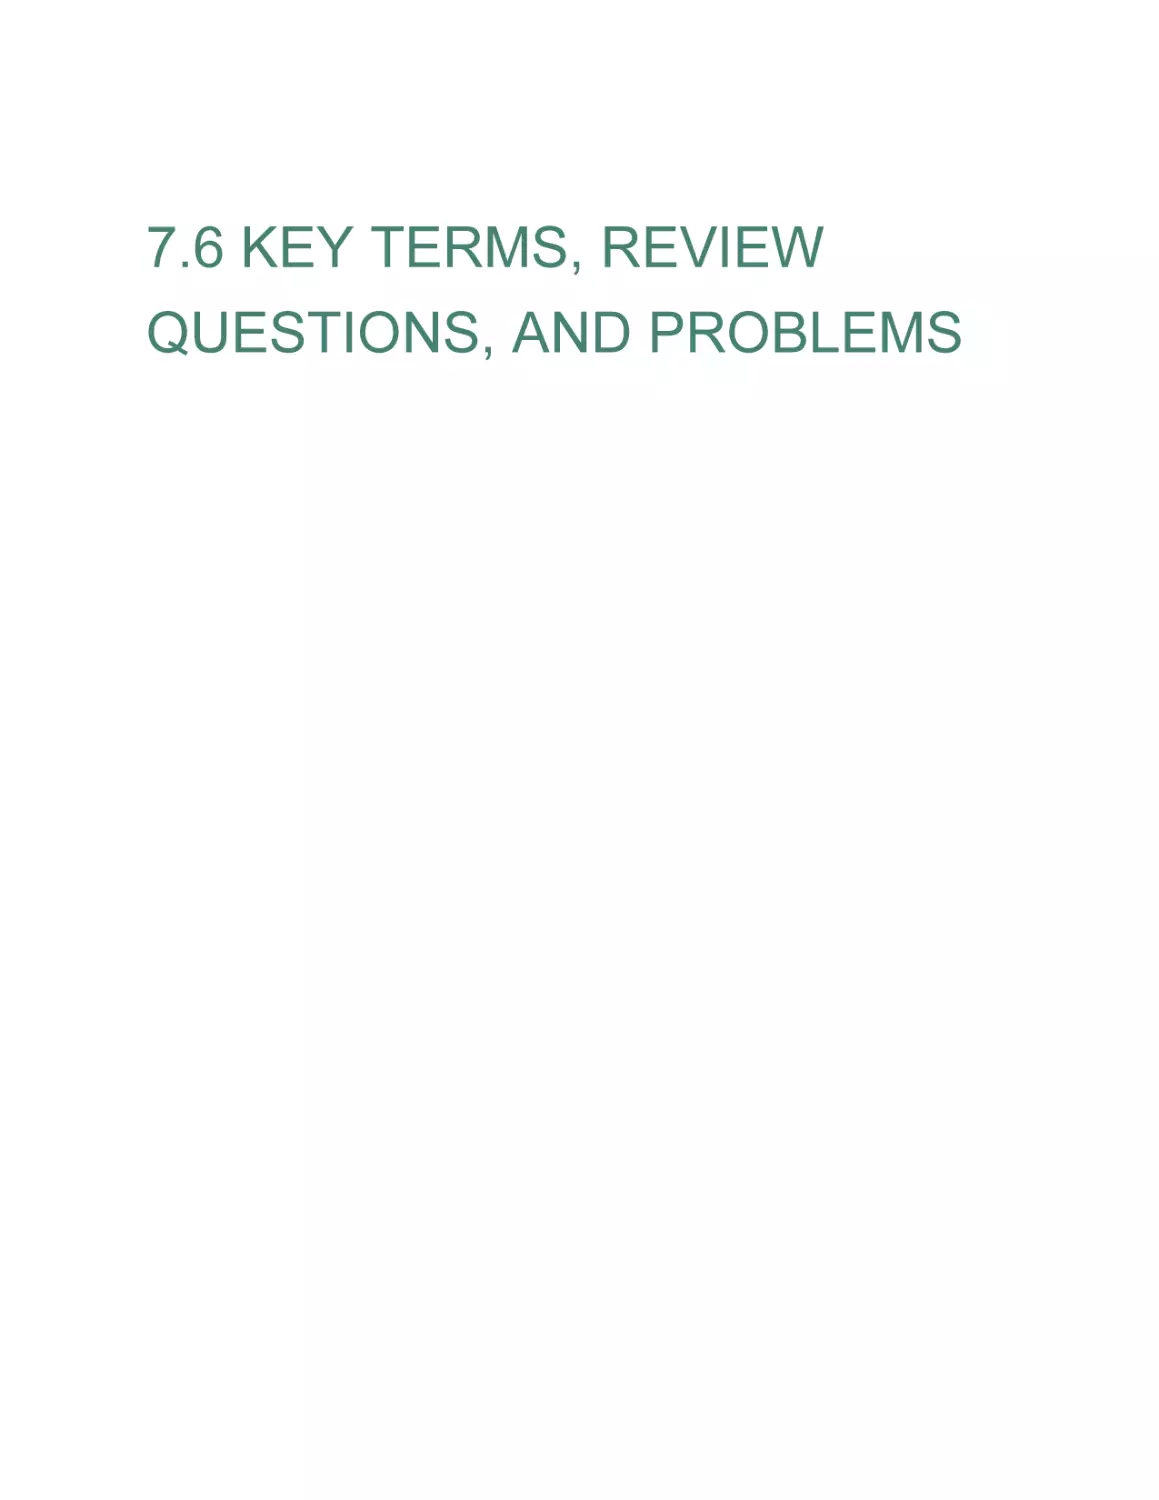 7.6 KEY TERMS, REVIEW QUESTIONS, AND PROBLEMS